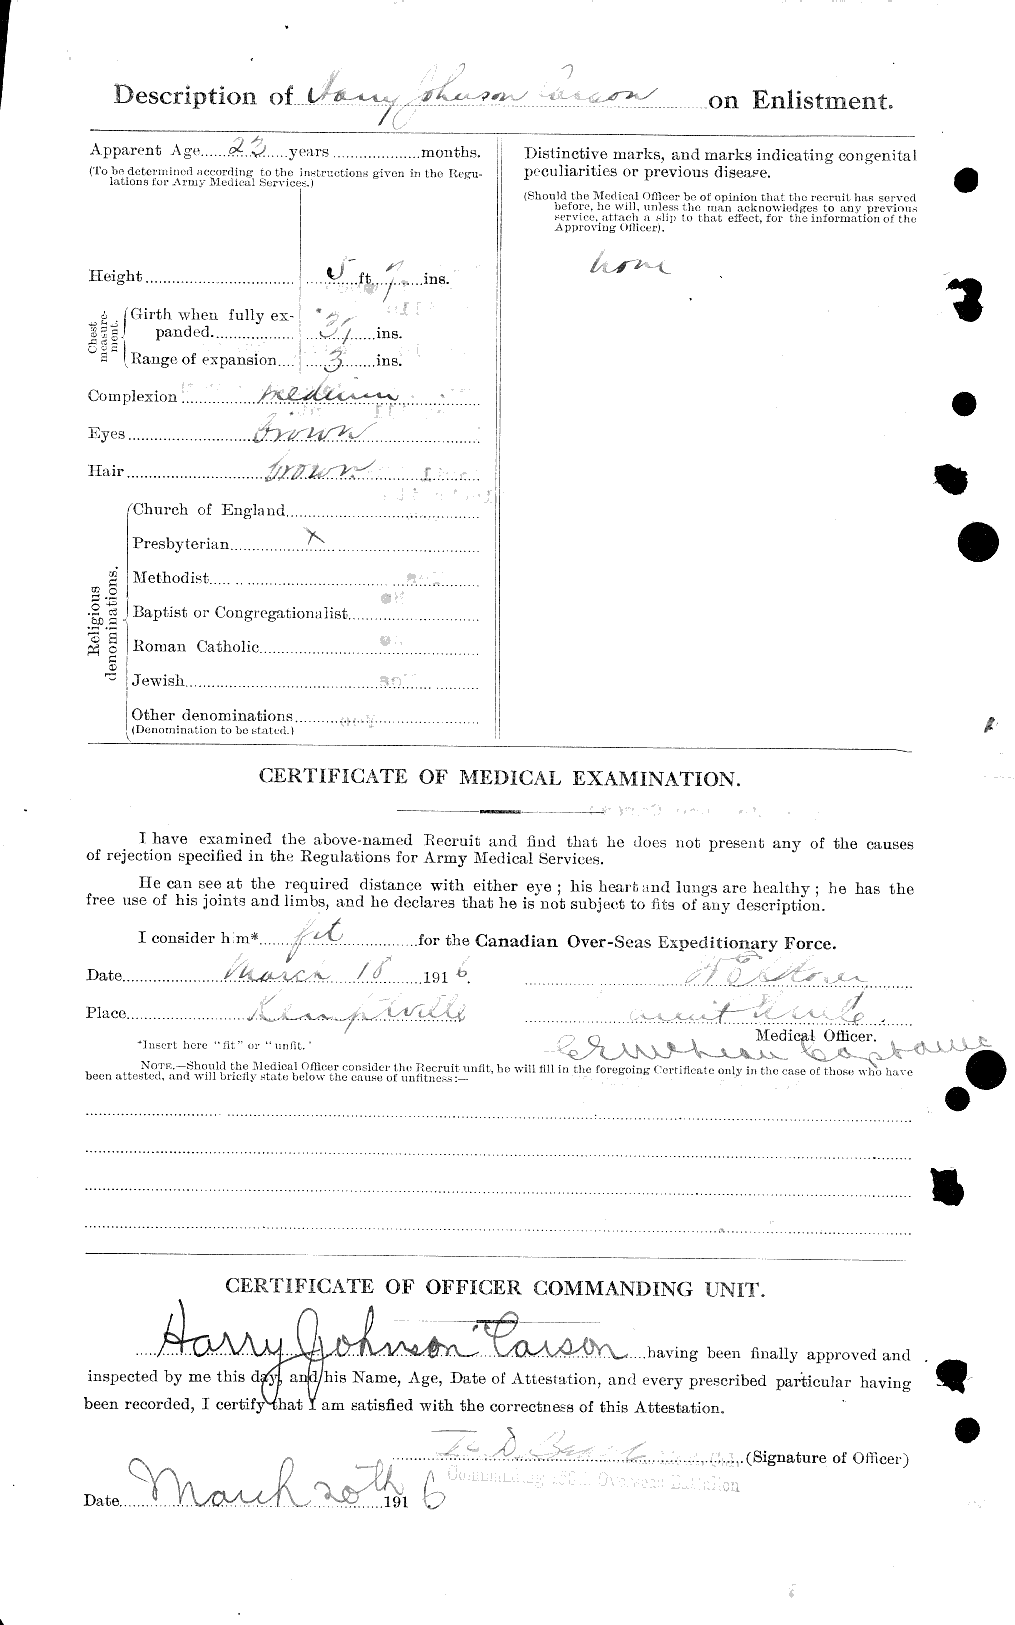 Personnel Records of the First World War - CEF 010768b